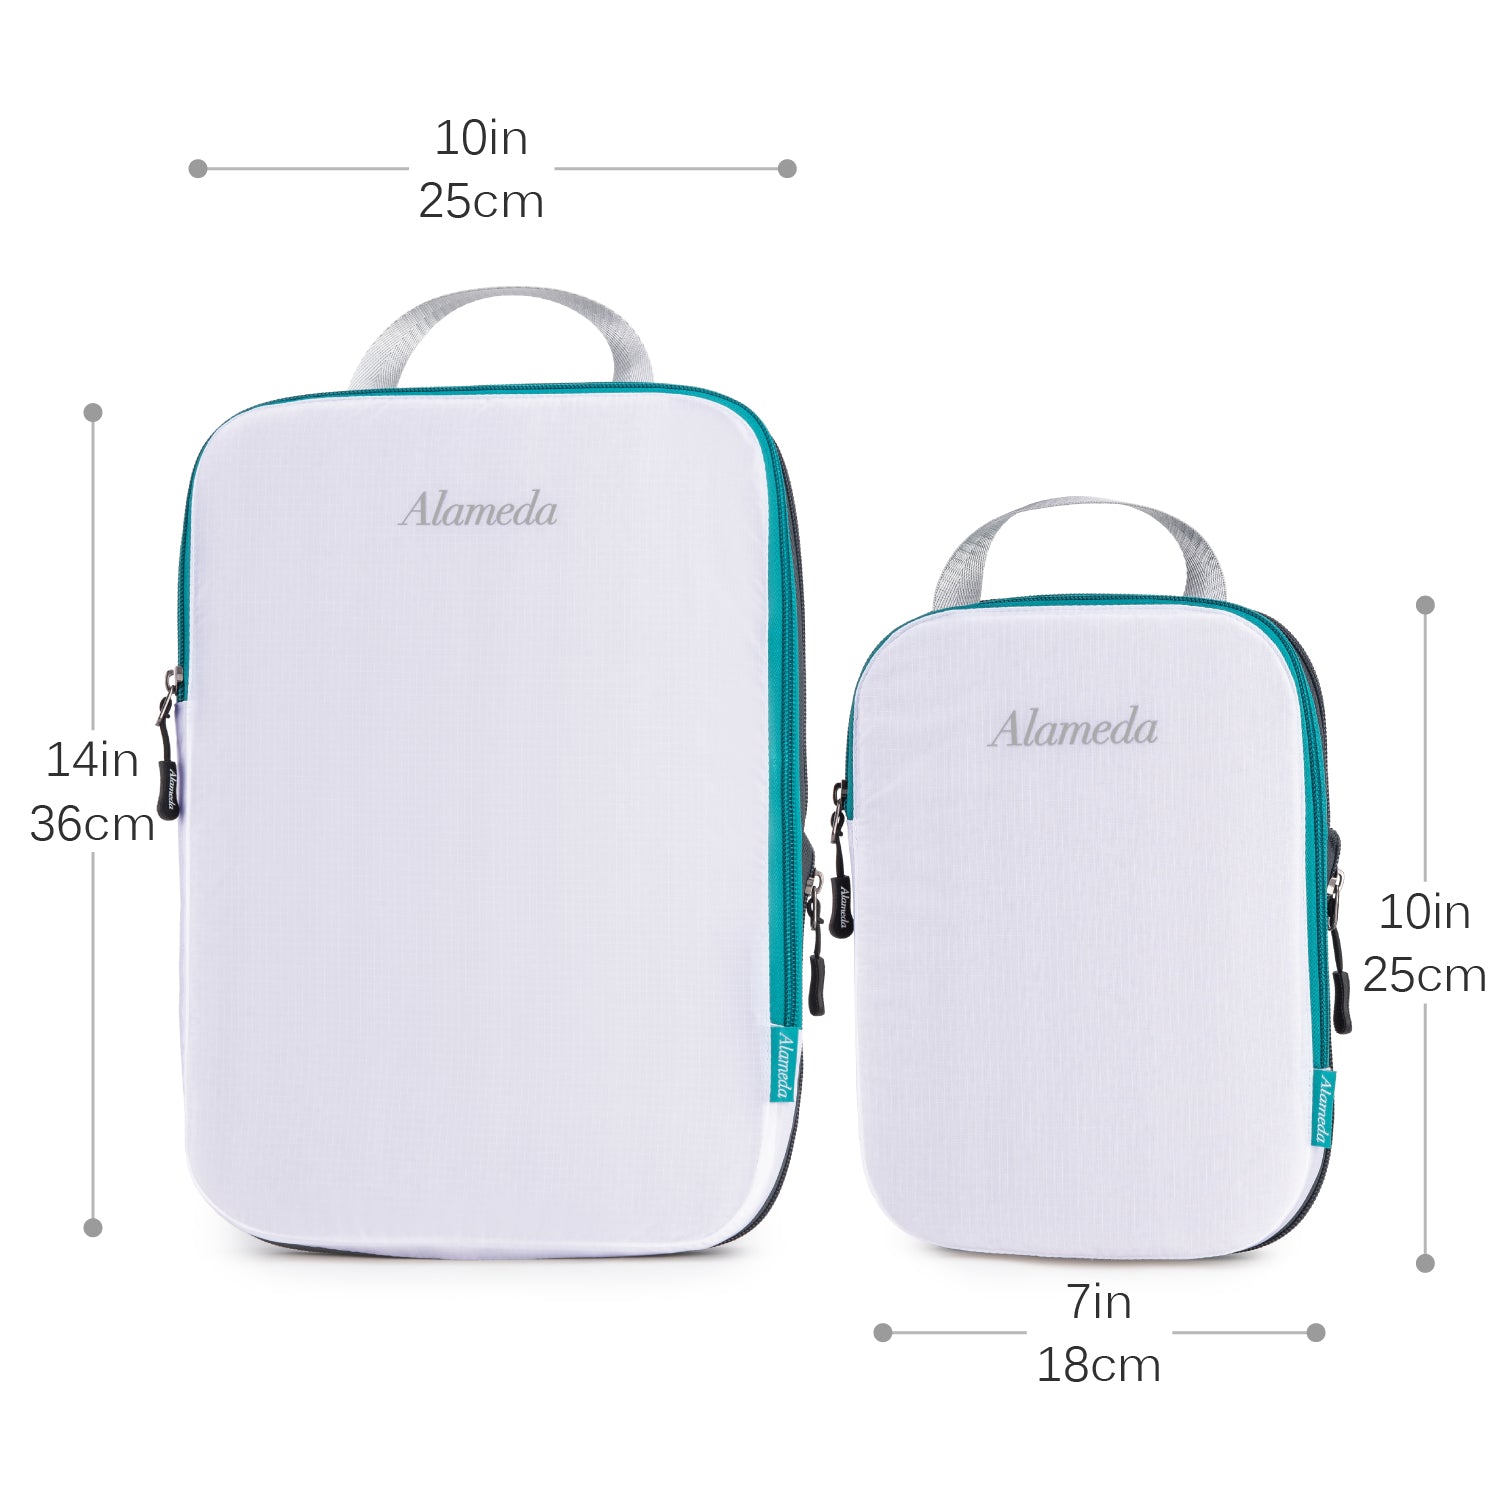 Alameda Packing Cube Set 3pcs for Travel,Compression Bags Organizer for Luggagebackpack